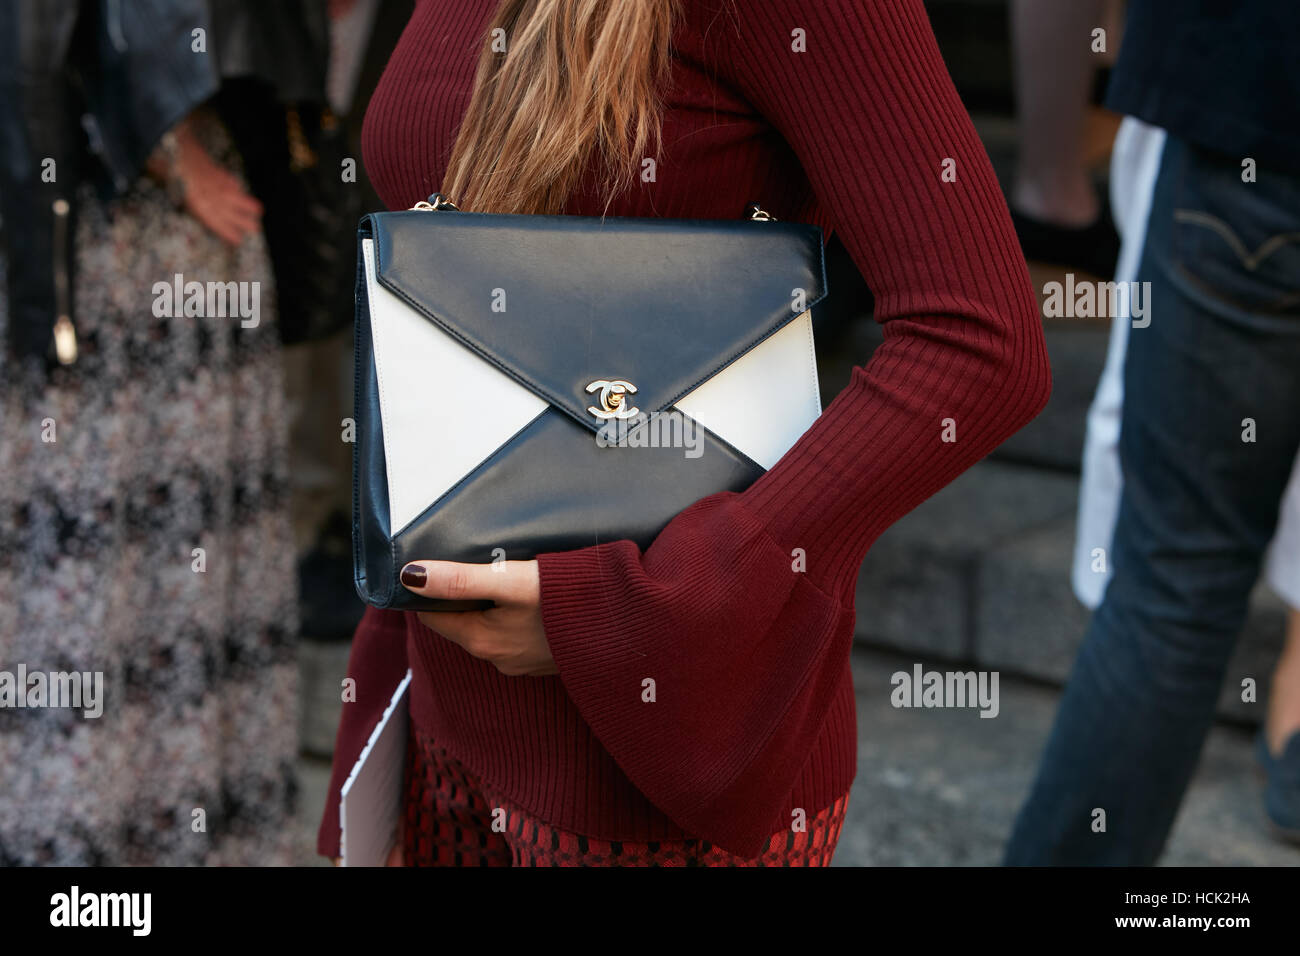 Milan, Italy - September, 22: woman influencer wearing leather Kelly bag  from Hermes. Fashion blogger outfit details, street style Stock Photo